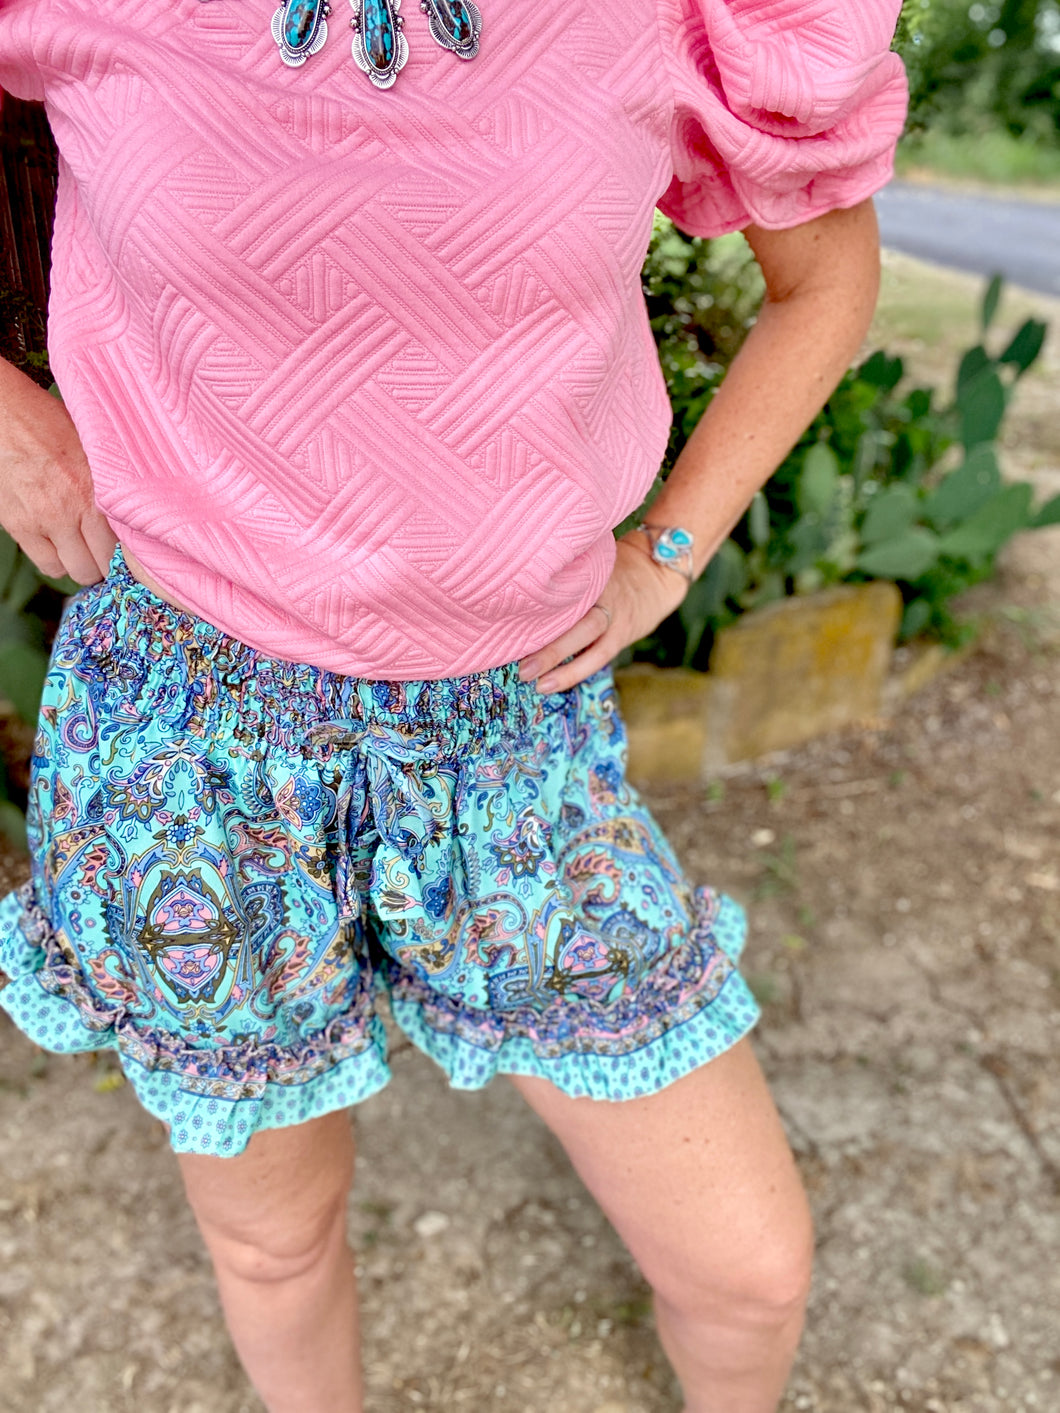 The sangria shorts